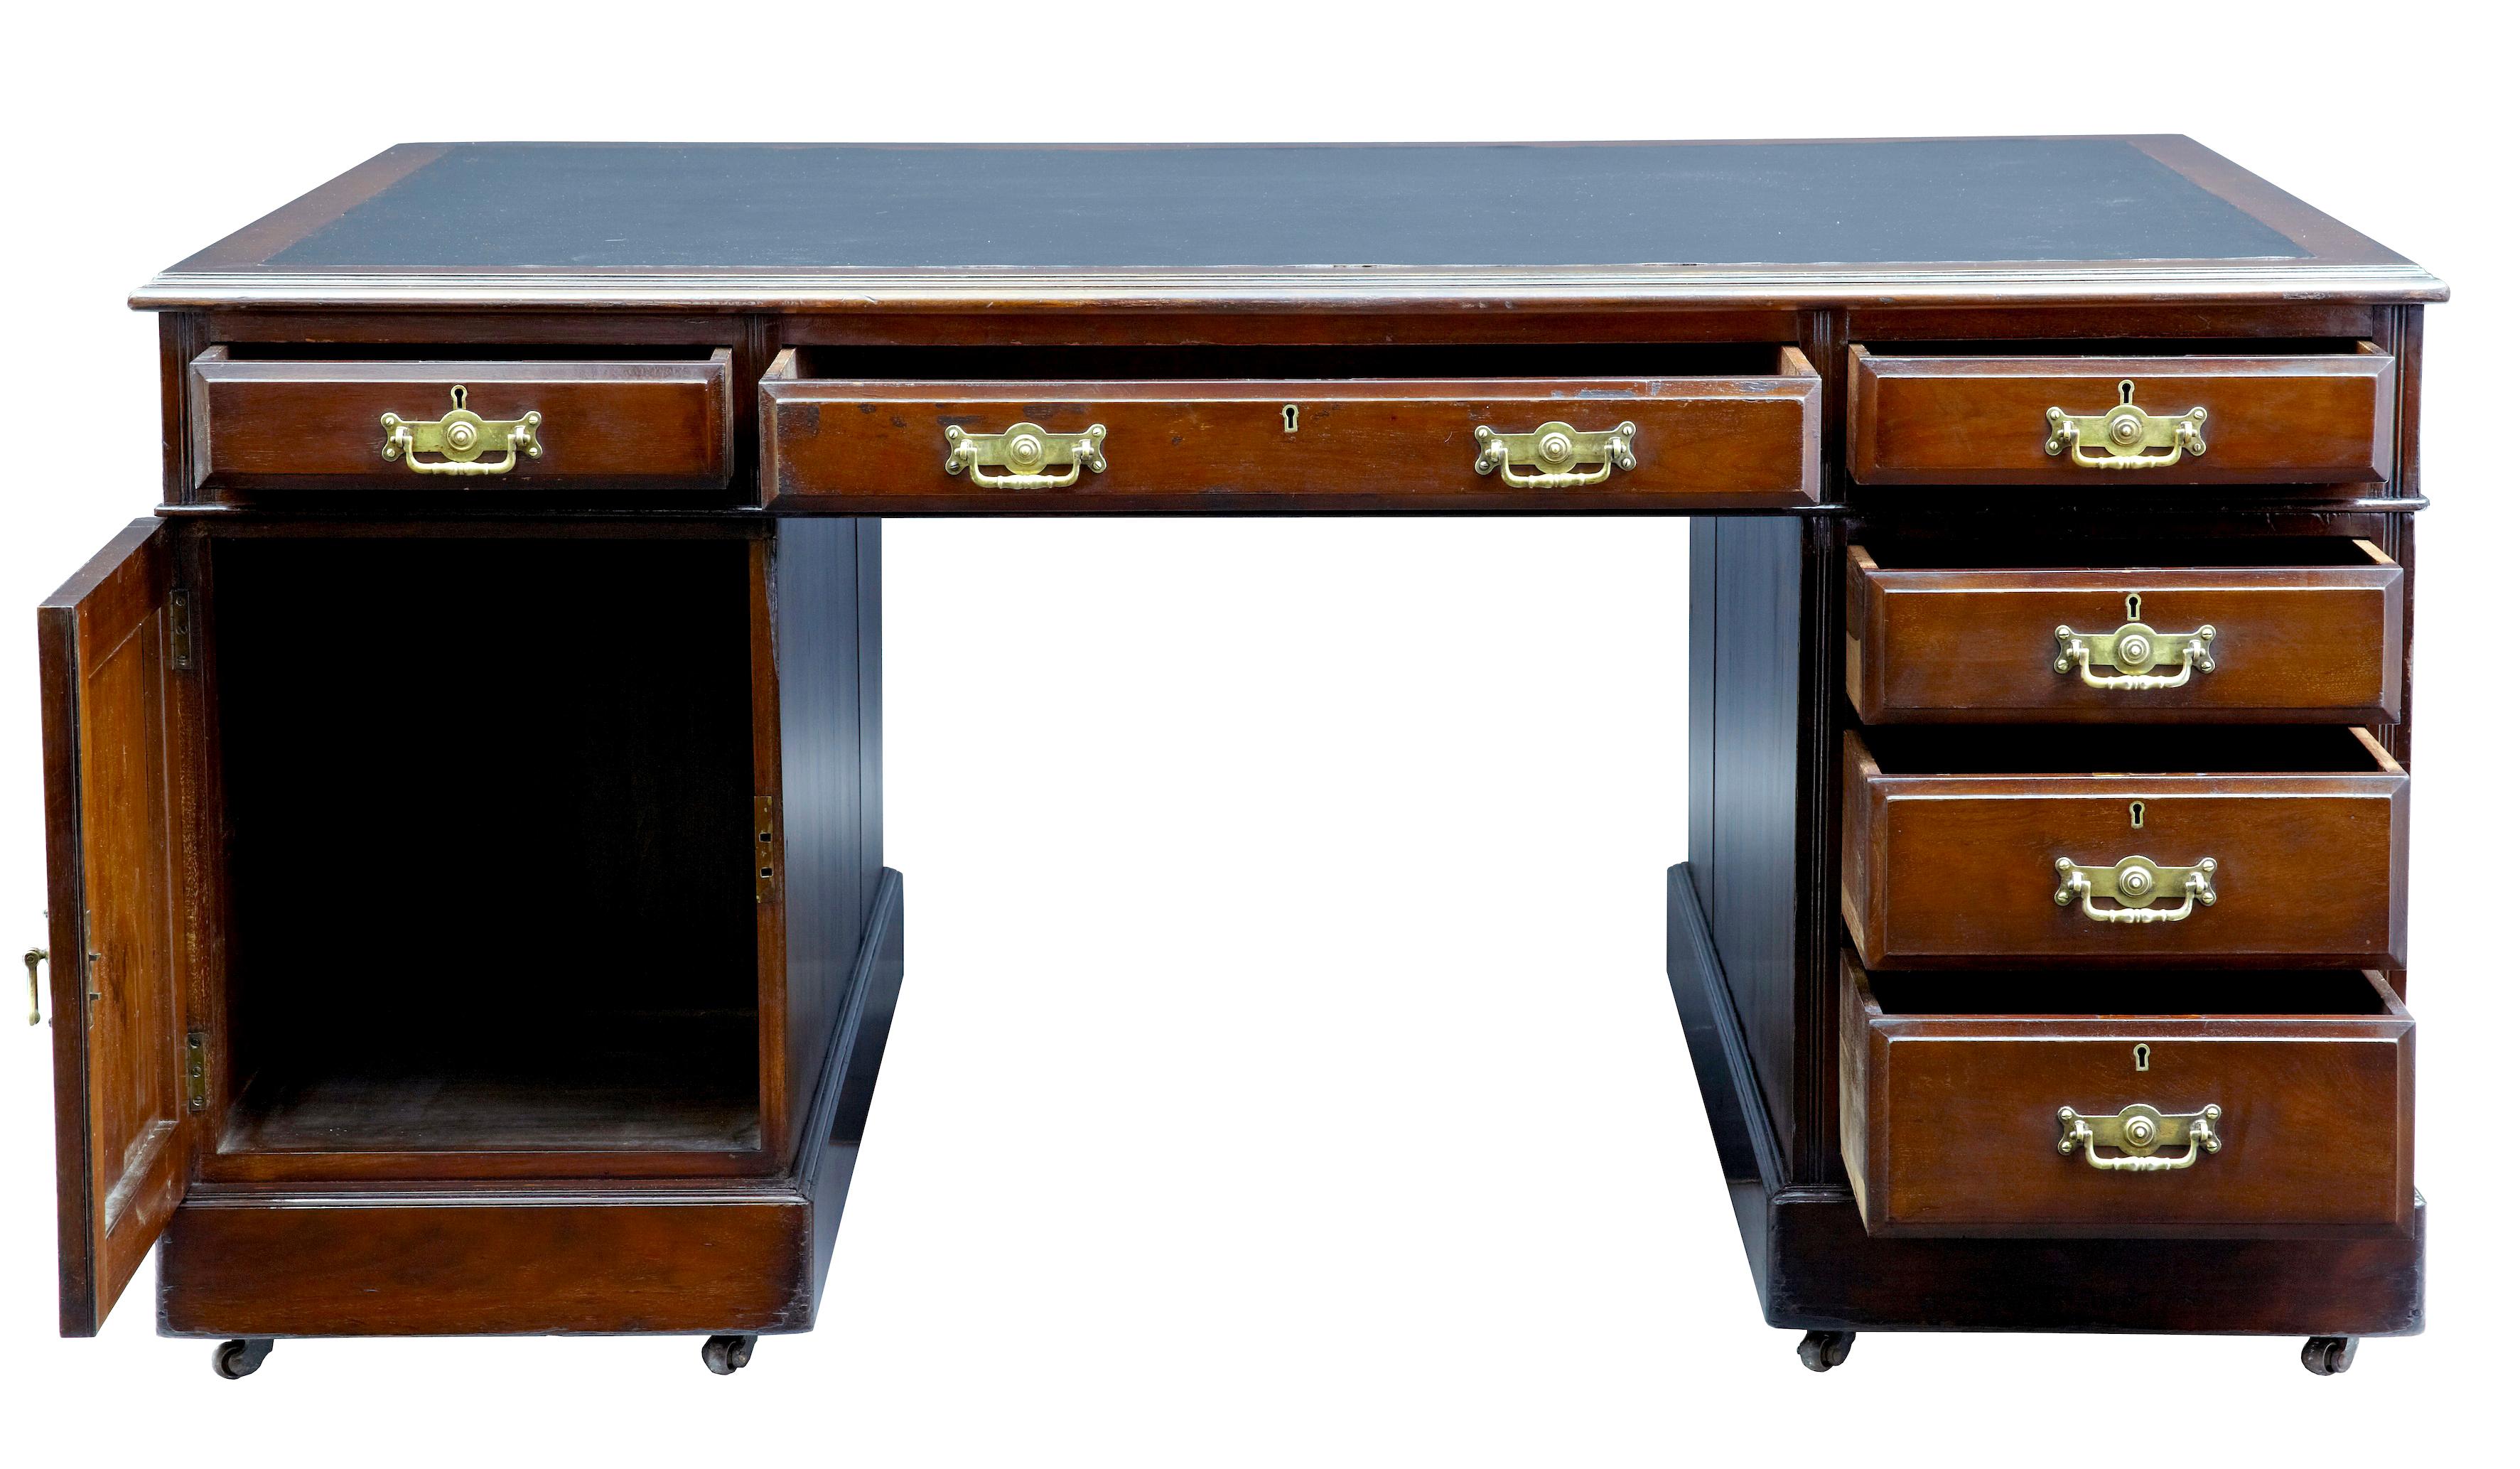 19th century mahogany partners desk.

3 part pedestal desk in original condition. Black leather writing surface with 3 drawers above the knee.
Single door to the left pedestal which opens to cupboard space. 3 graduating drawers to the right hand